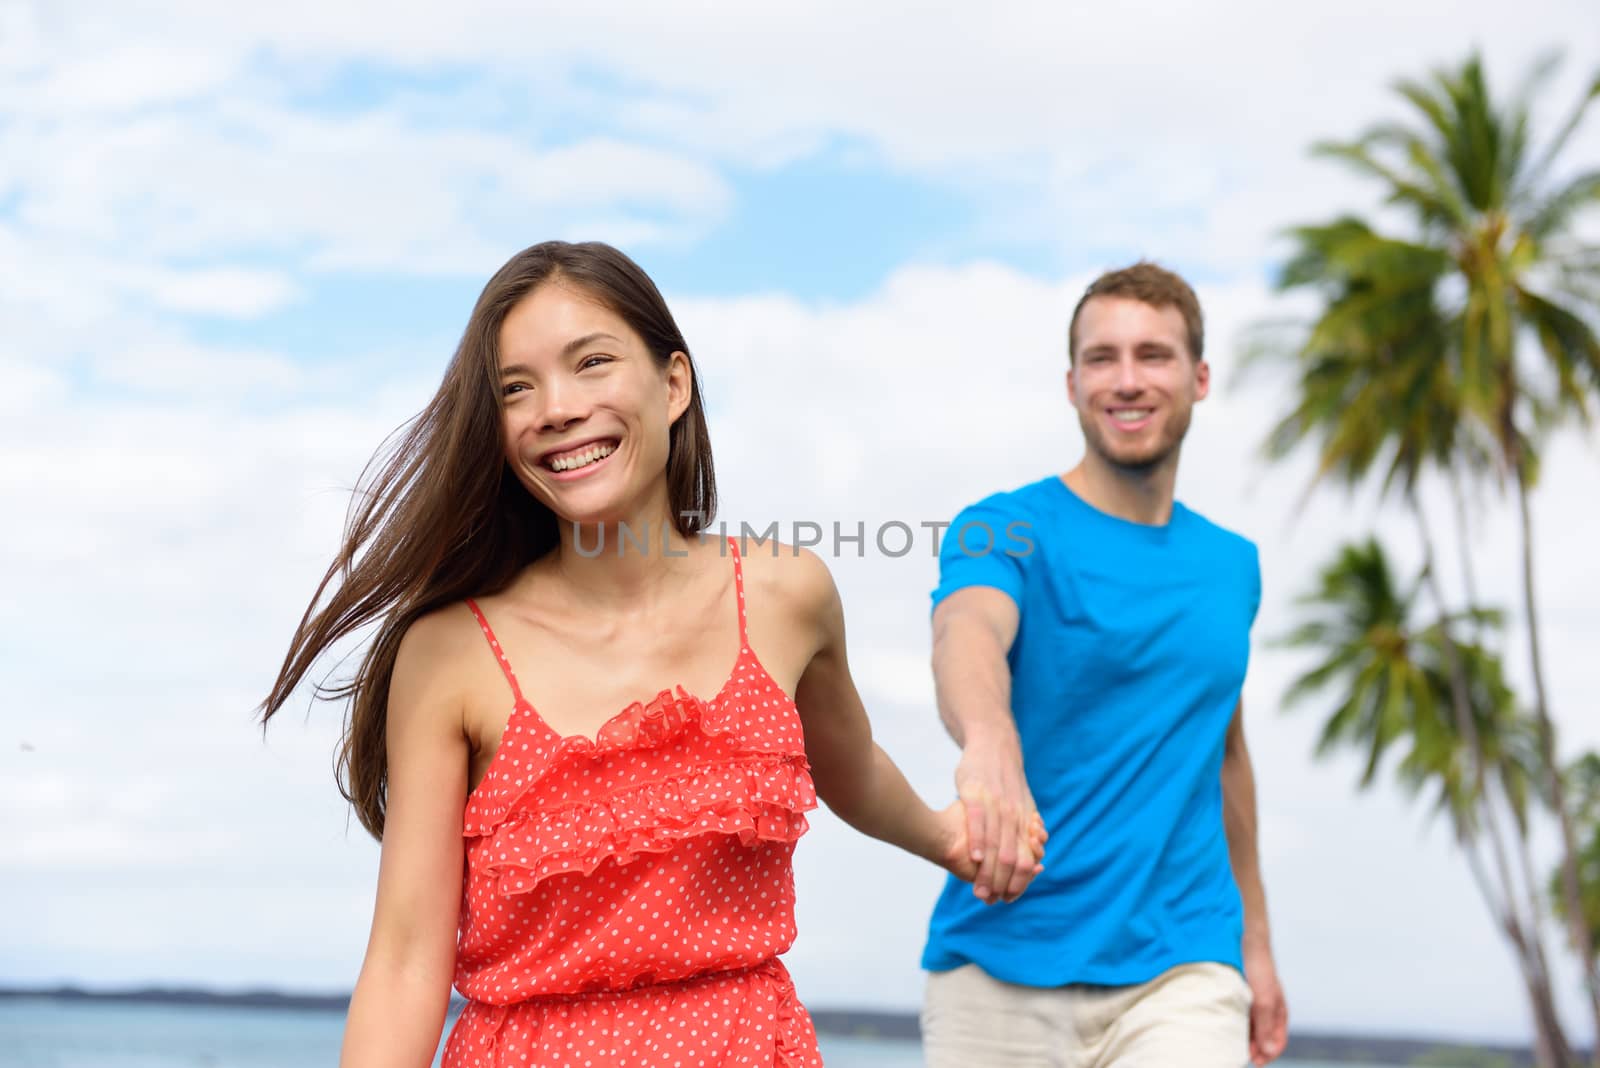 Happy summer vacation couple walking holding hands on beach travel destination. Asian woman caucasian man multiracial people together having fun.